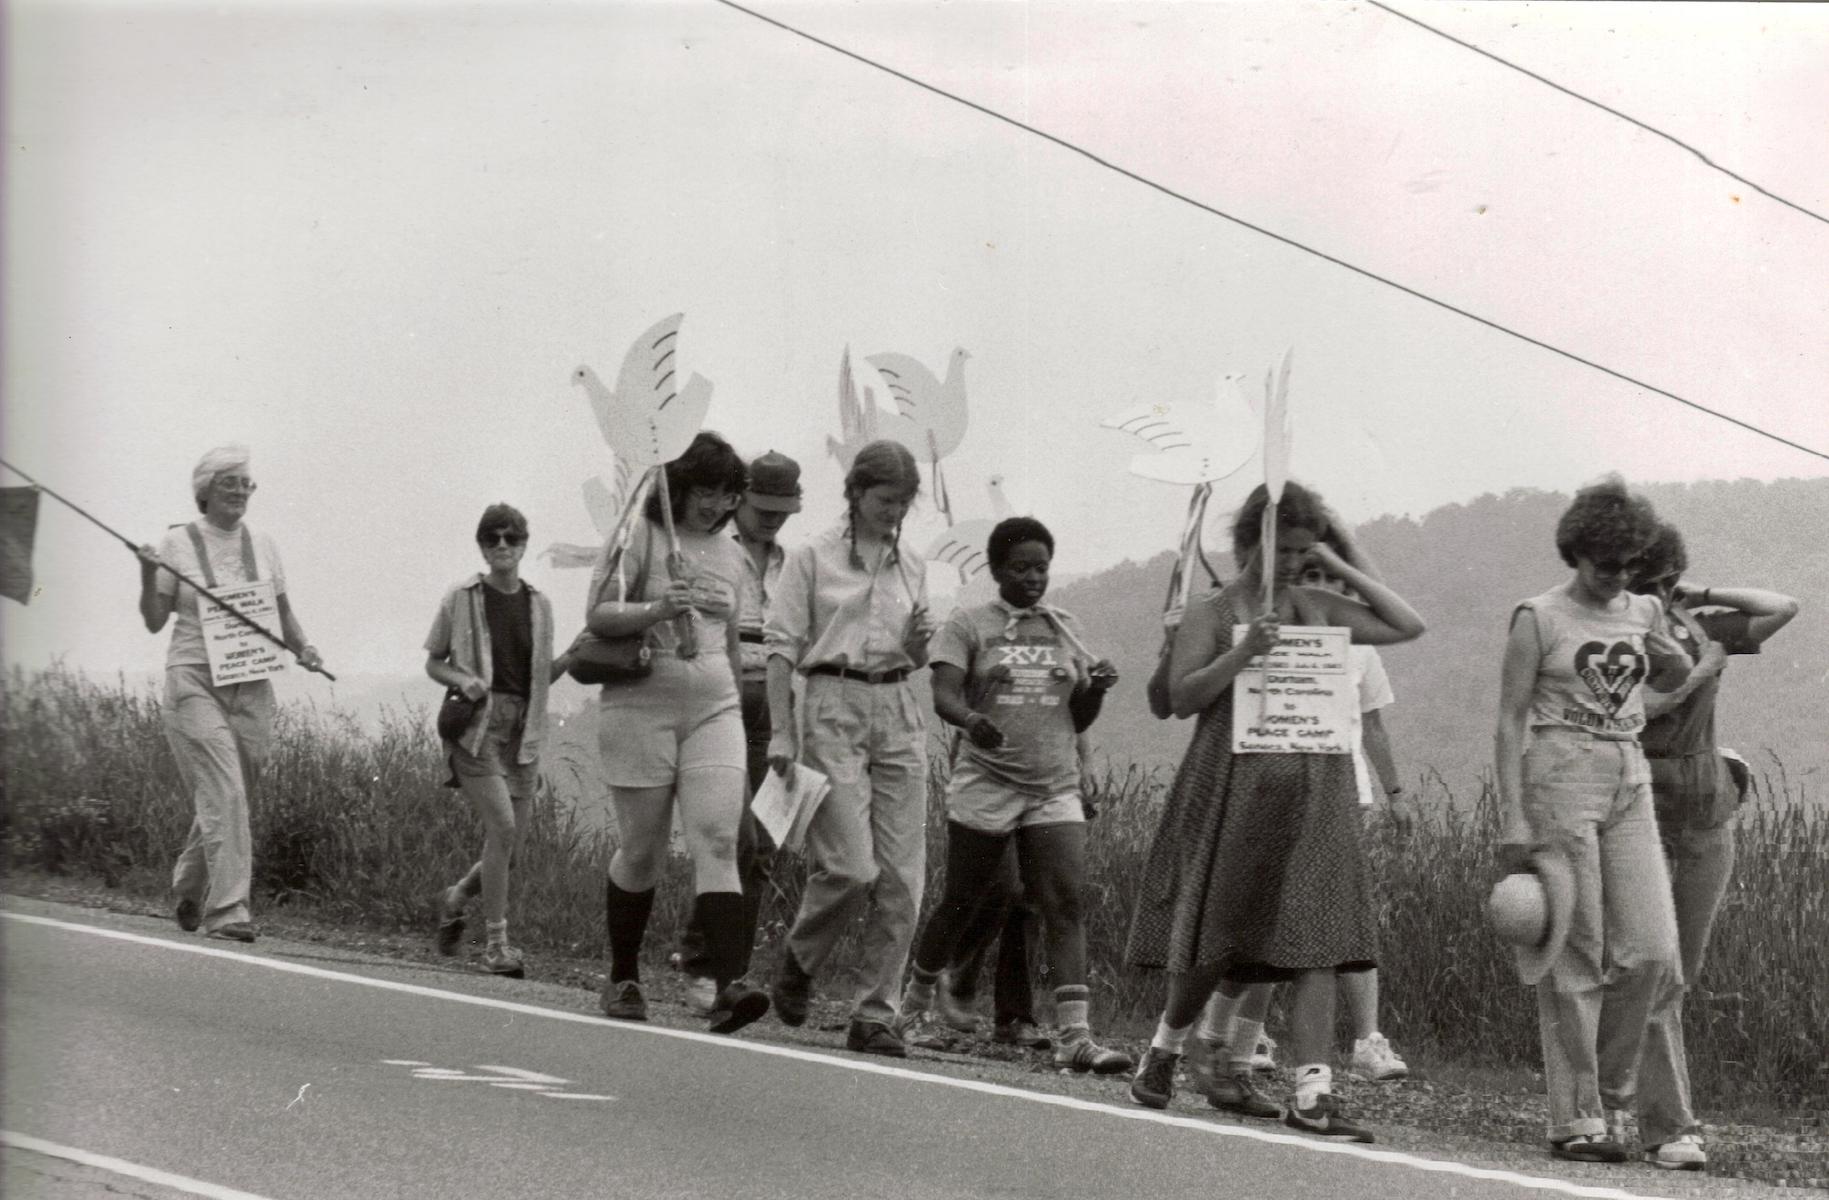 Mandy on the War Resisters League/Southeast Women’s Peace Walk to the Seneca Women’s Peace Encampment, 1983, Seneca, NY. Mandy shares, “I had joined the War Resisters League/Southeast staff in 1982 when I moved from San Francisco to Durham, NC. I was the lead coordinator. This photo was taken by someone on our walk.” Photo courtesy of Mandy Carter.